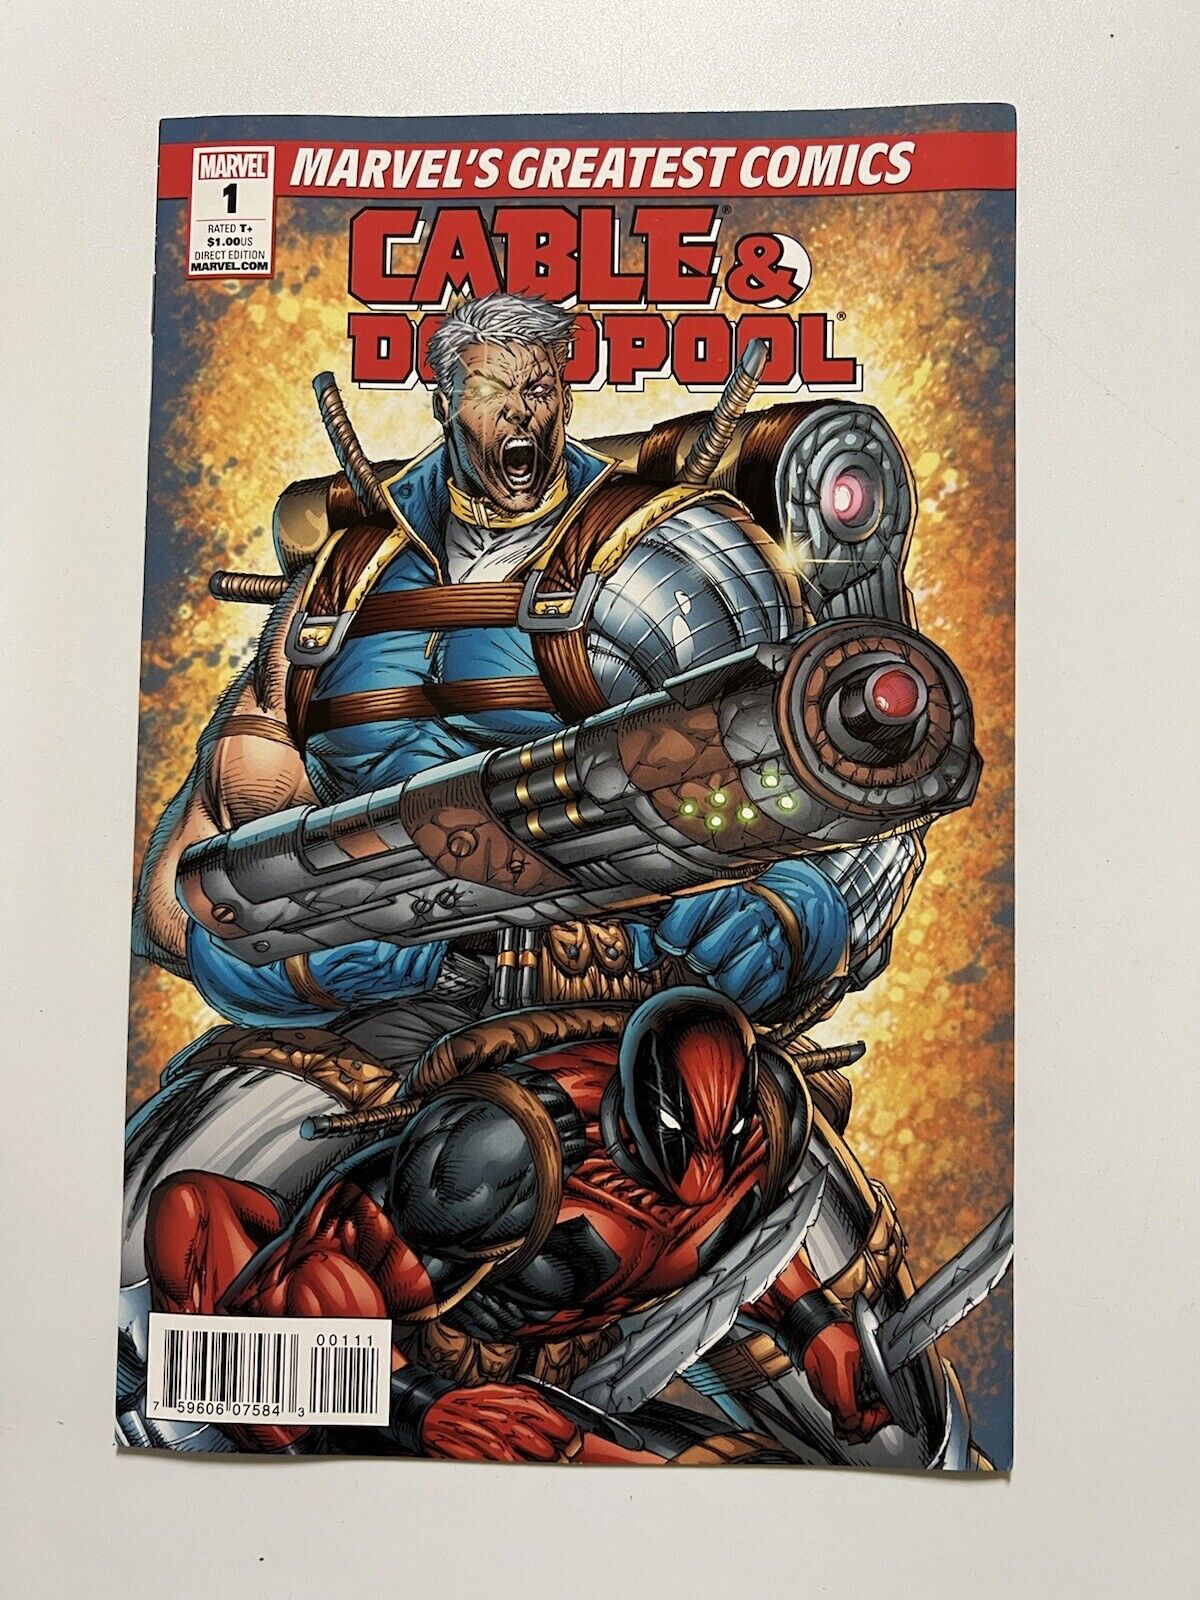 Cable Deadpool #1 (May 2004, Marvel Comics) Team Up Begins Rob Liefeld Cover NM 